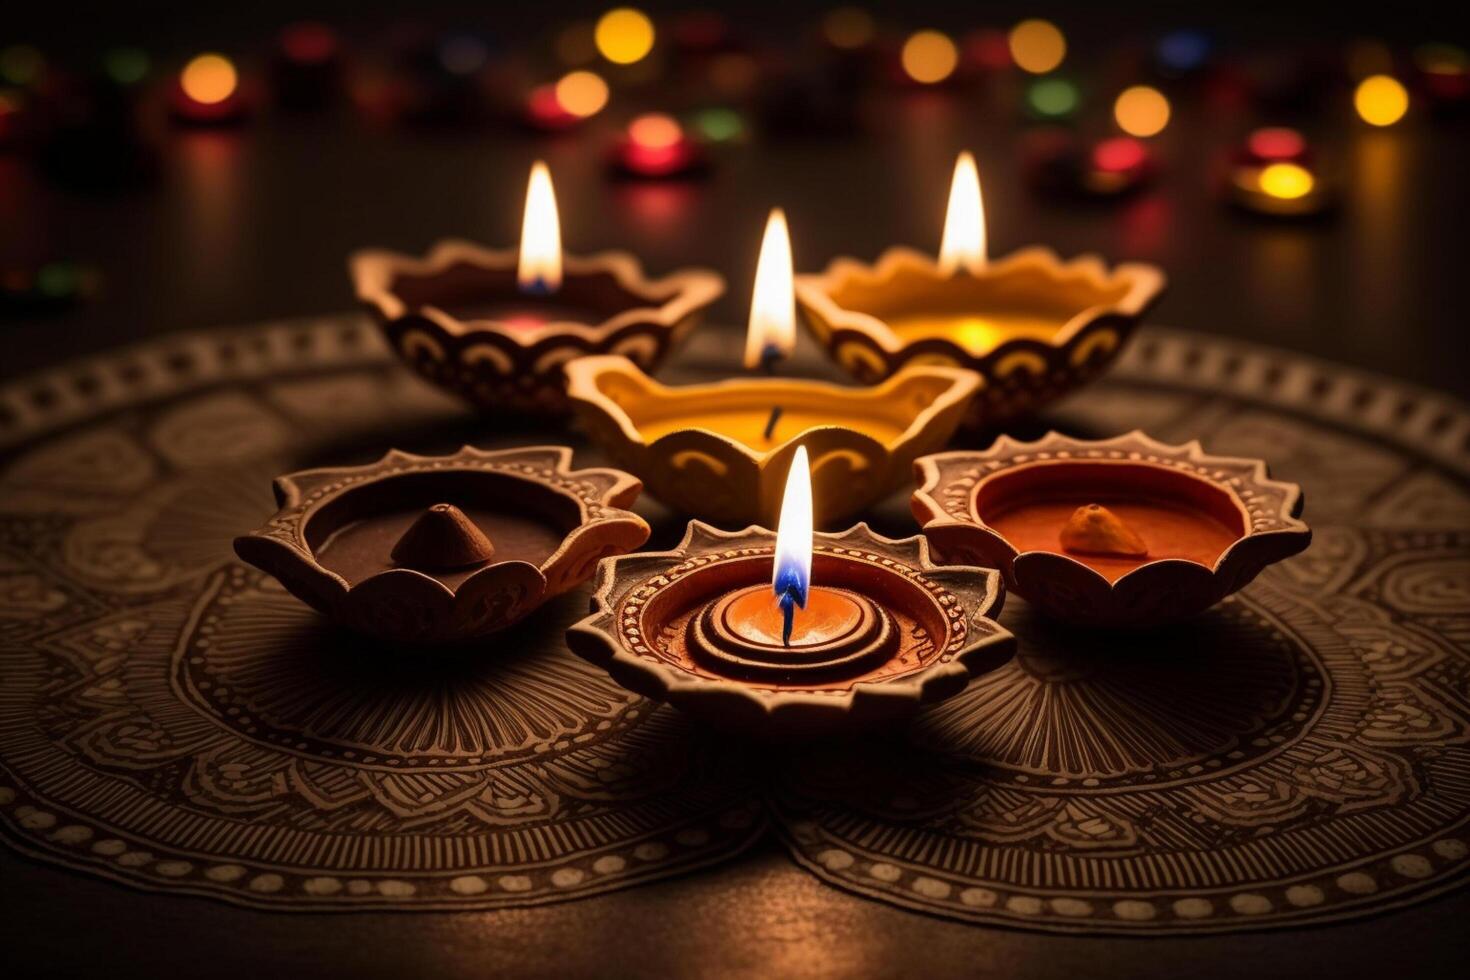 Happy diwali or deepavali traditional indian festival with clay diya oil lamp. Indian hindu festival of light symbol with candle and light. Clay diya lamp lit during diwali celebration by photo